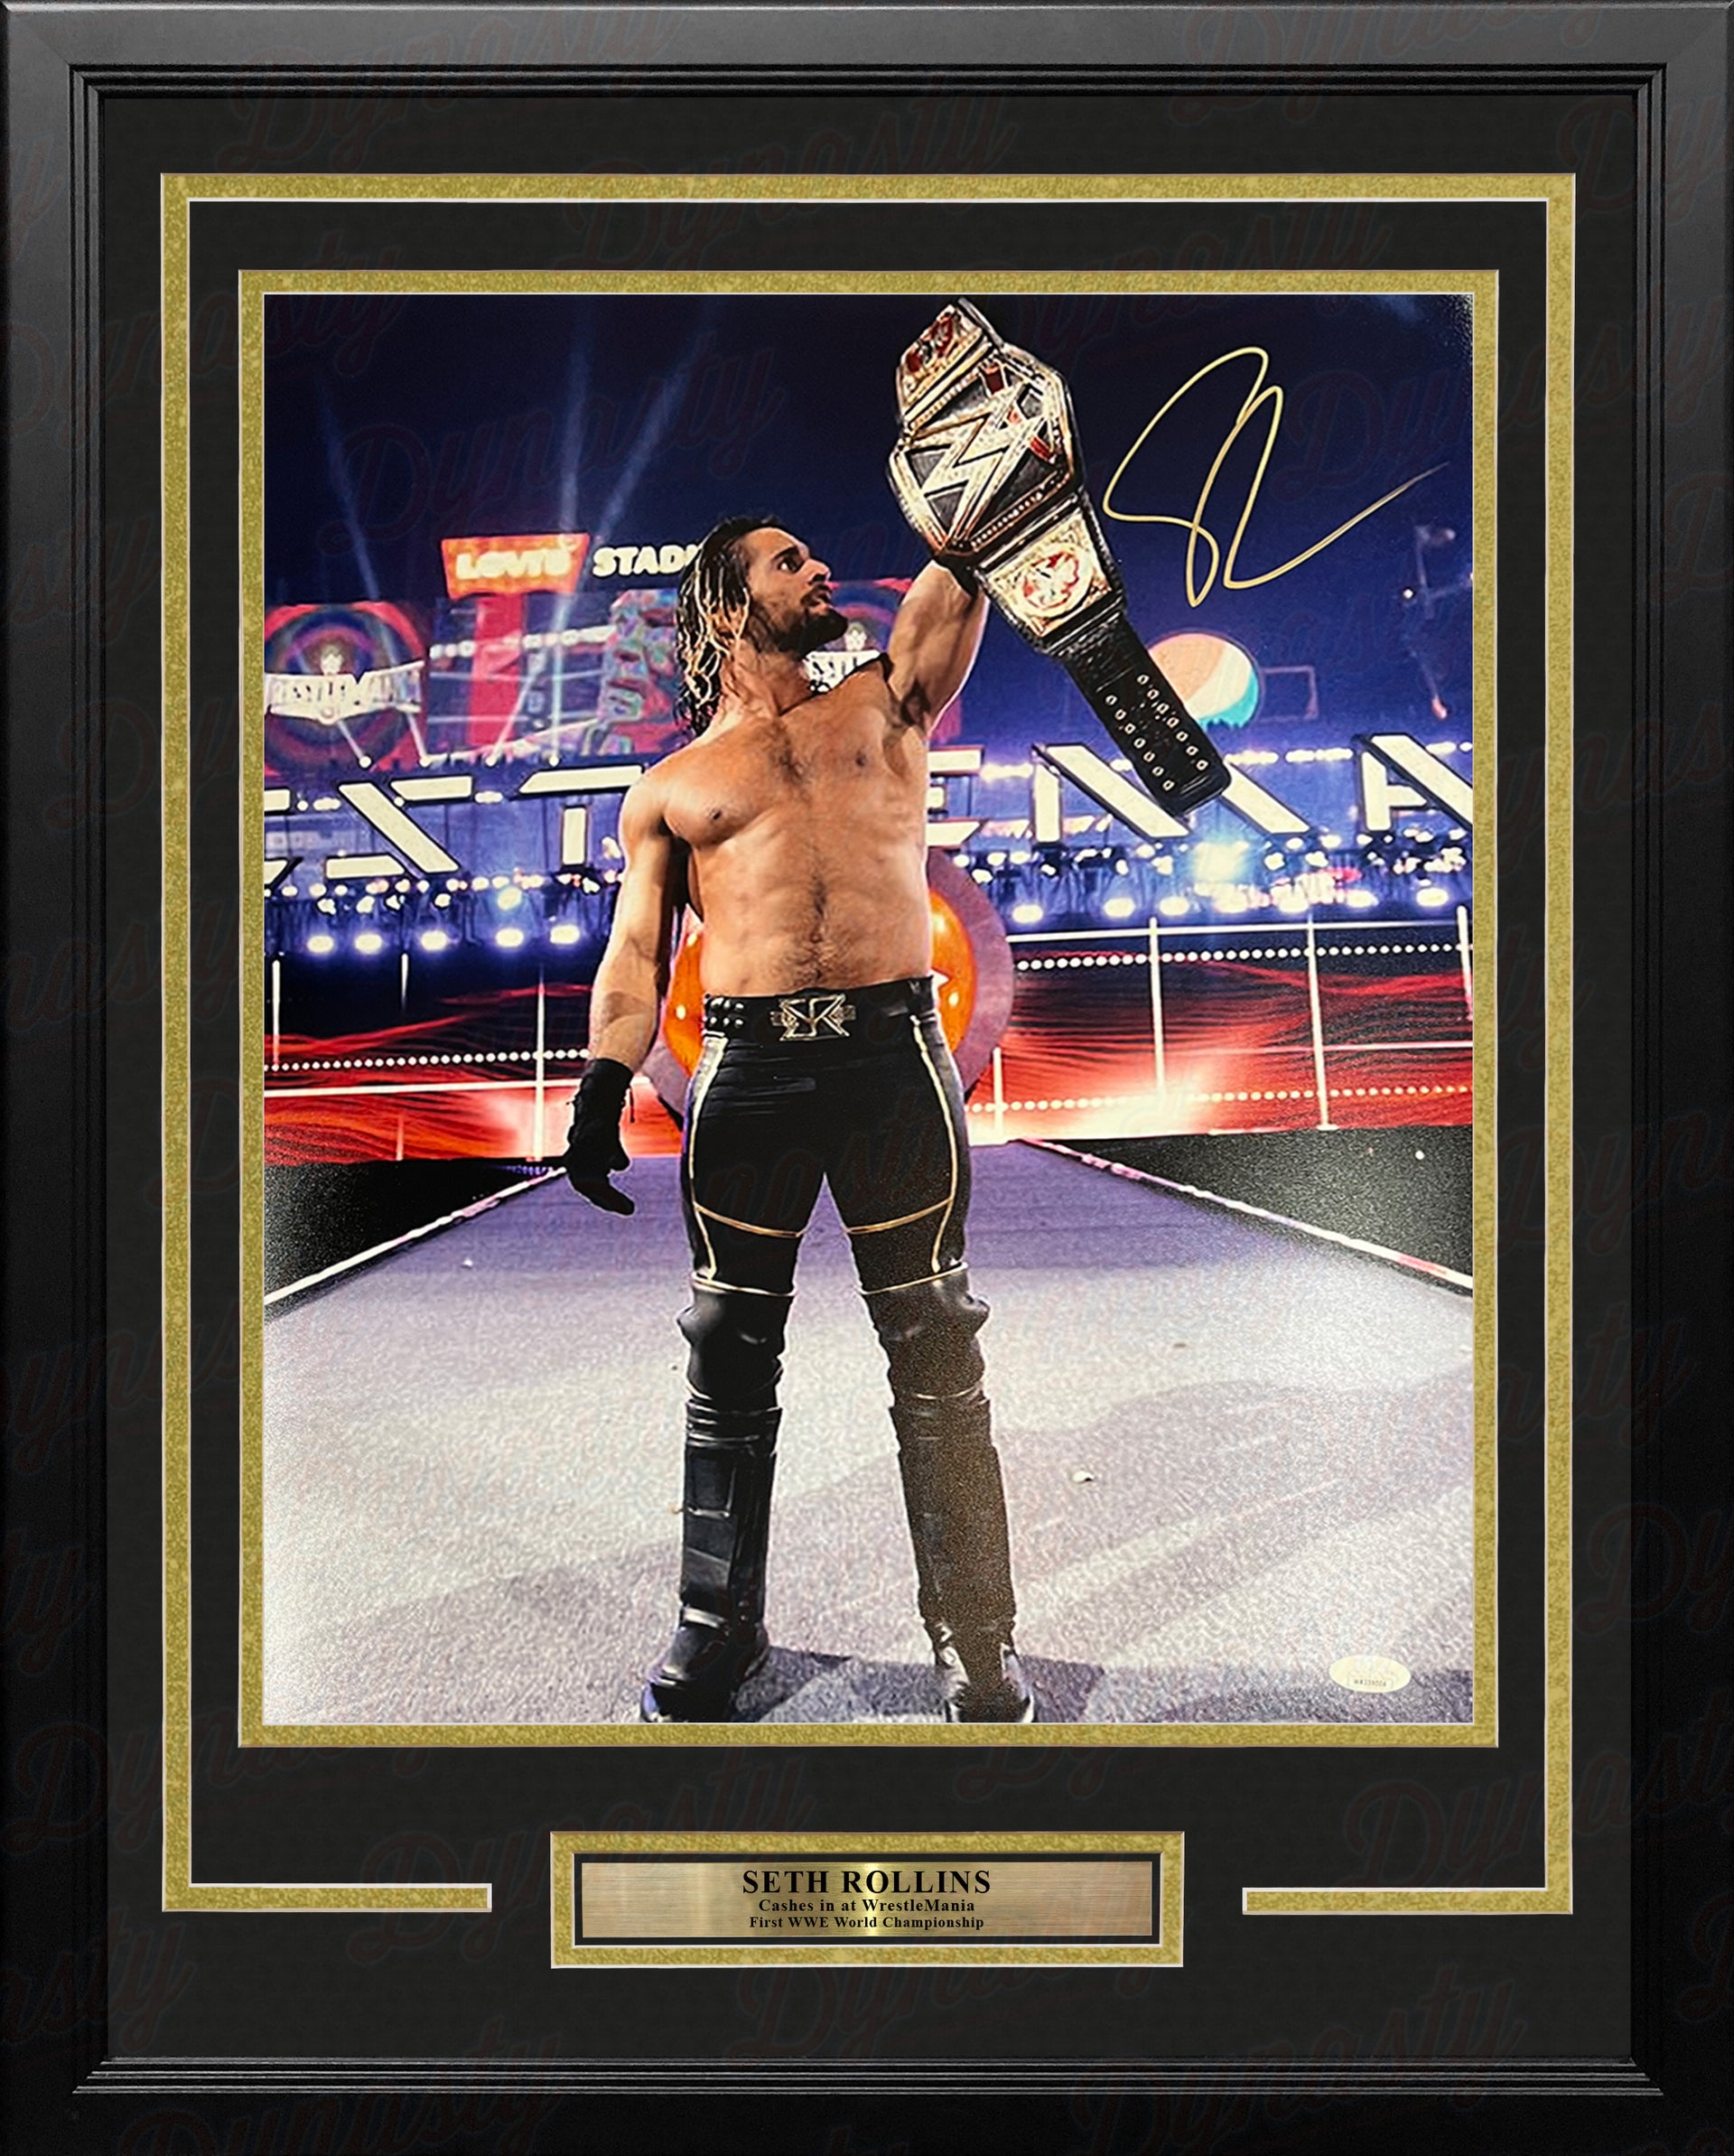 Seth Rollins Money-in-the-Bank Championship Cash-in Autographed Framed WWE Wrestling Photo - Dynasty Sports & Framing 